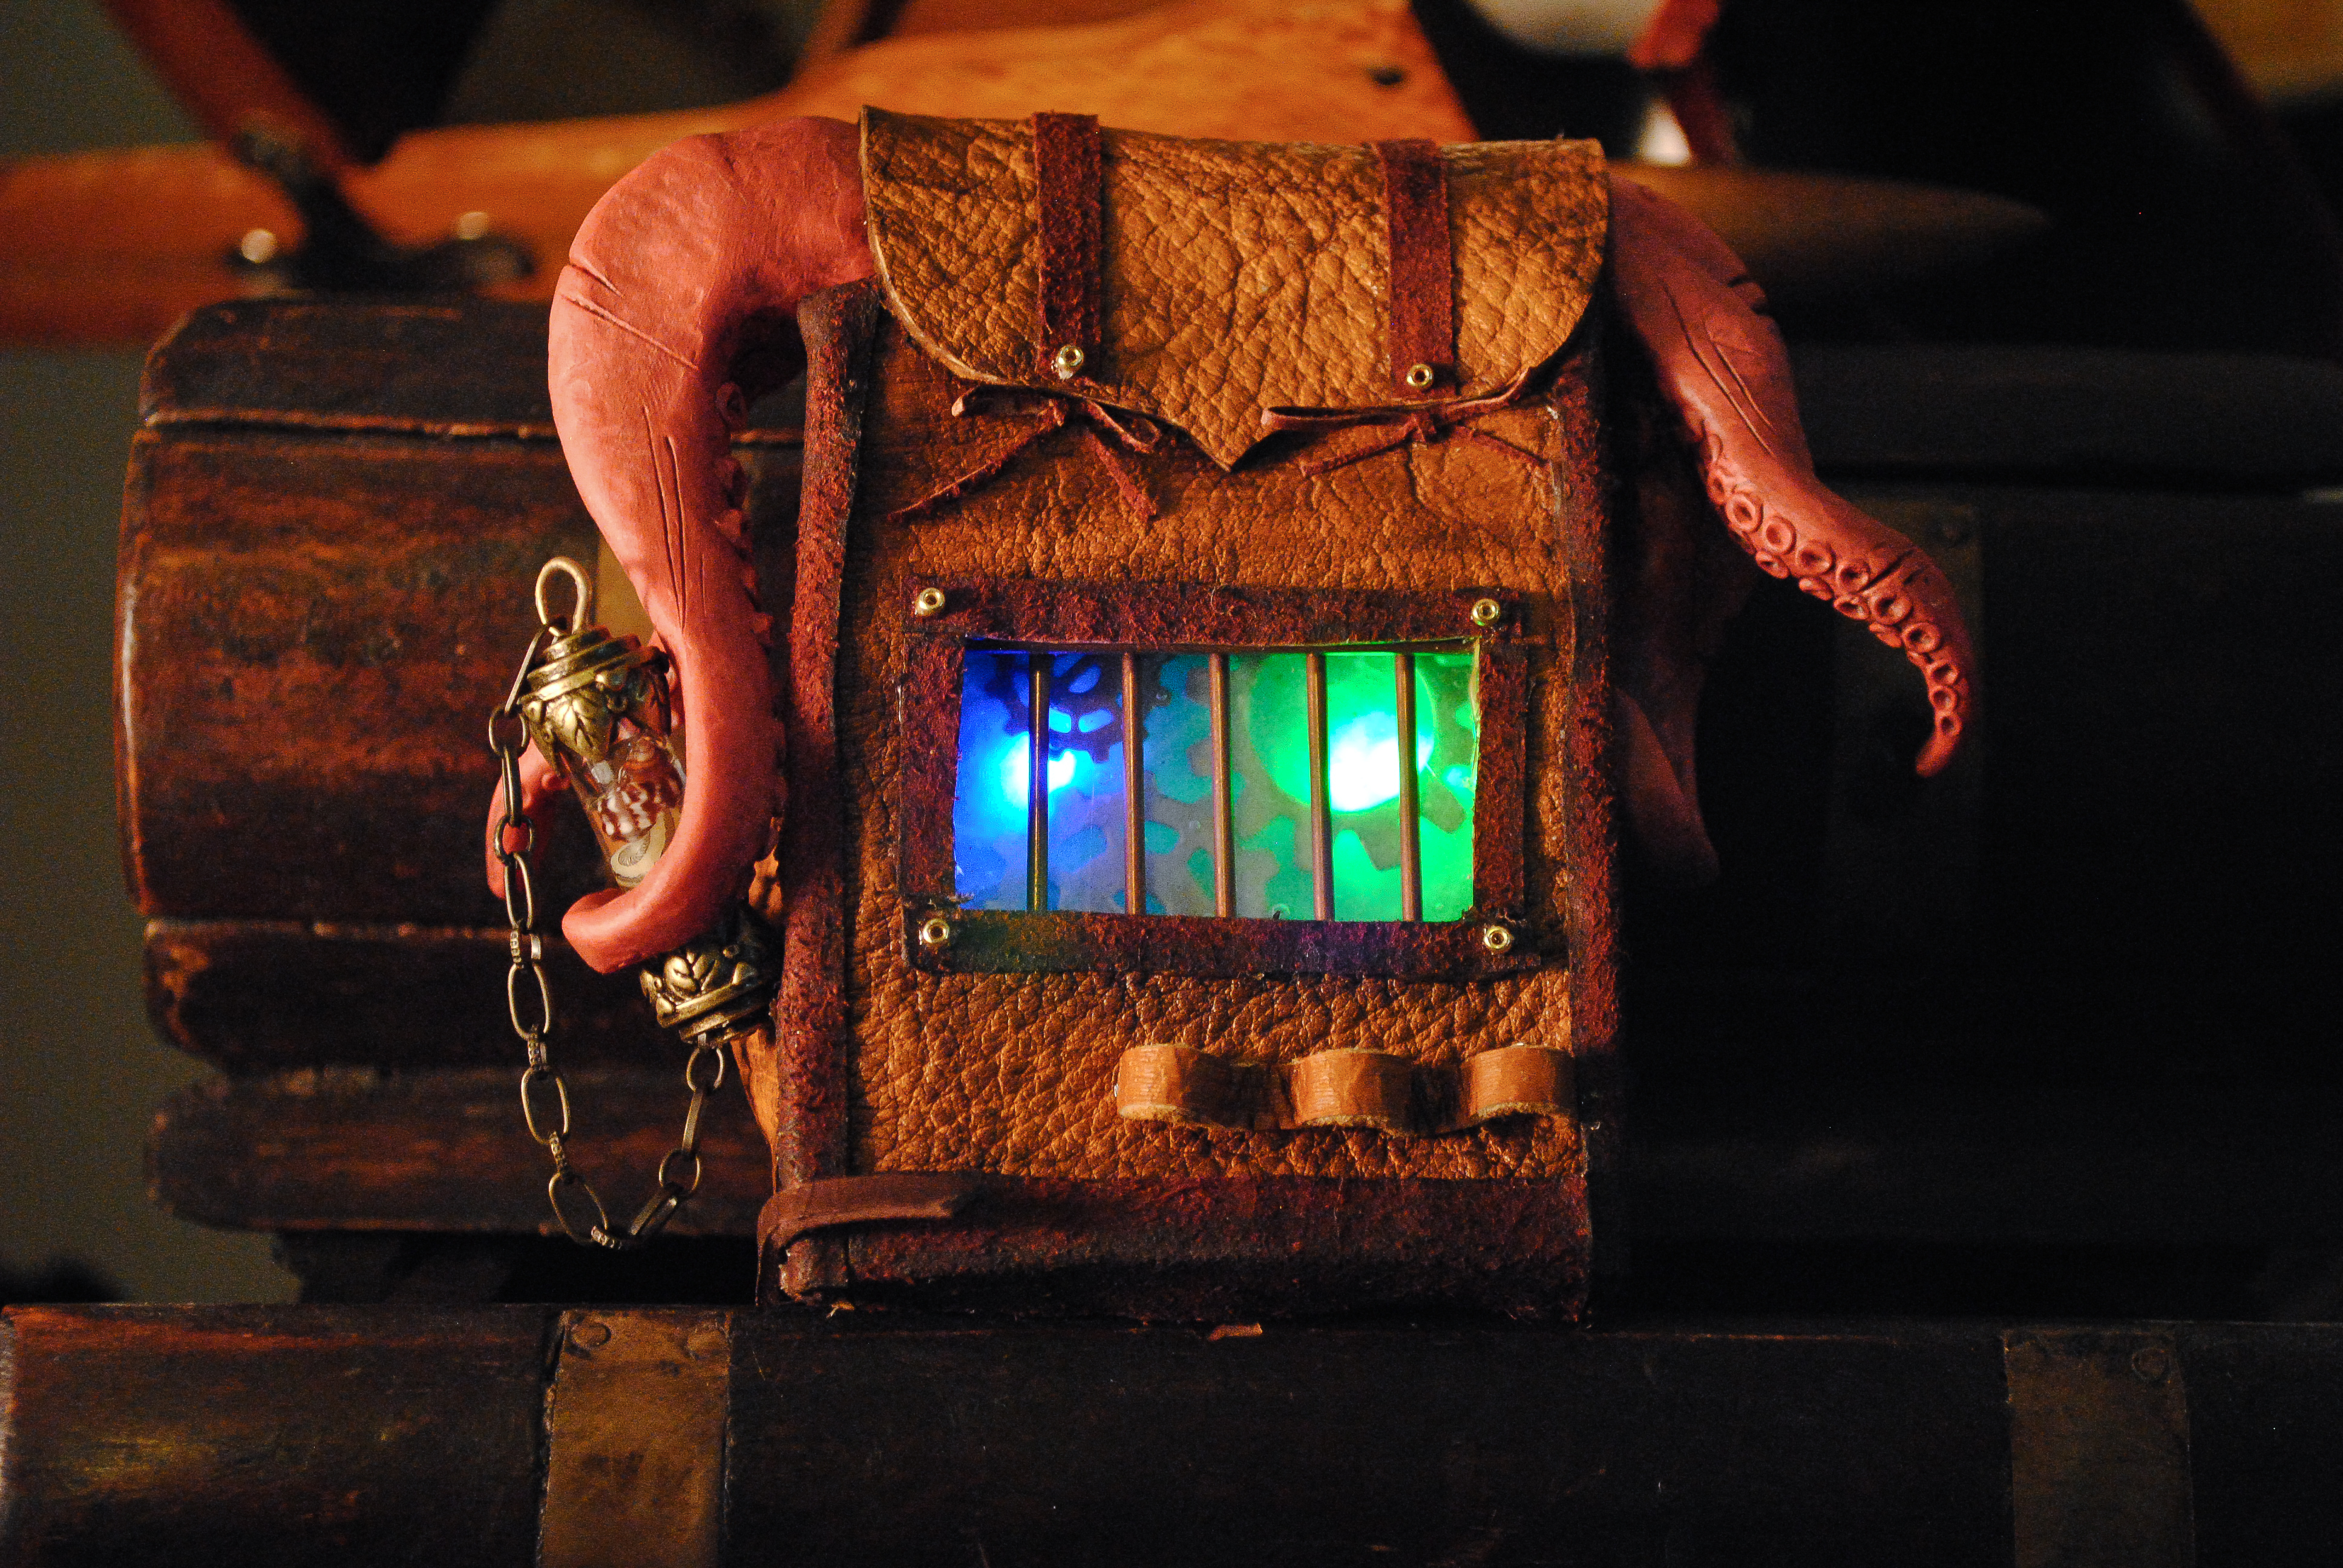 A doll-sized deer-skin "Traveler's Bag" made for a steampunk doll convention. Complete with inner LED lighting and sculpted tentacles.